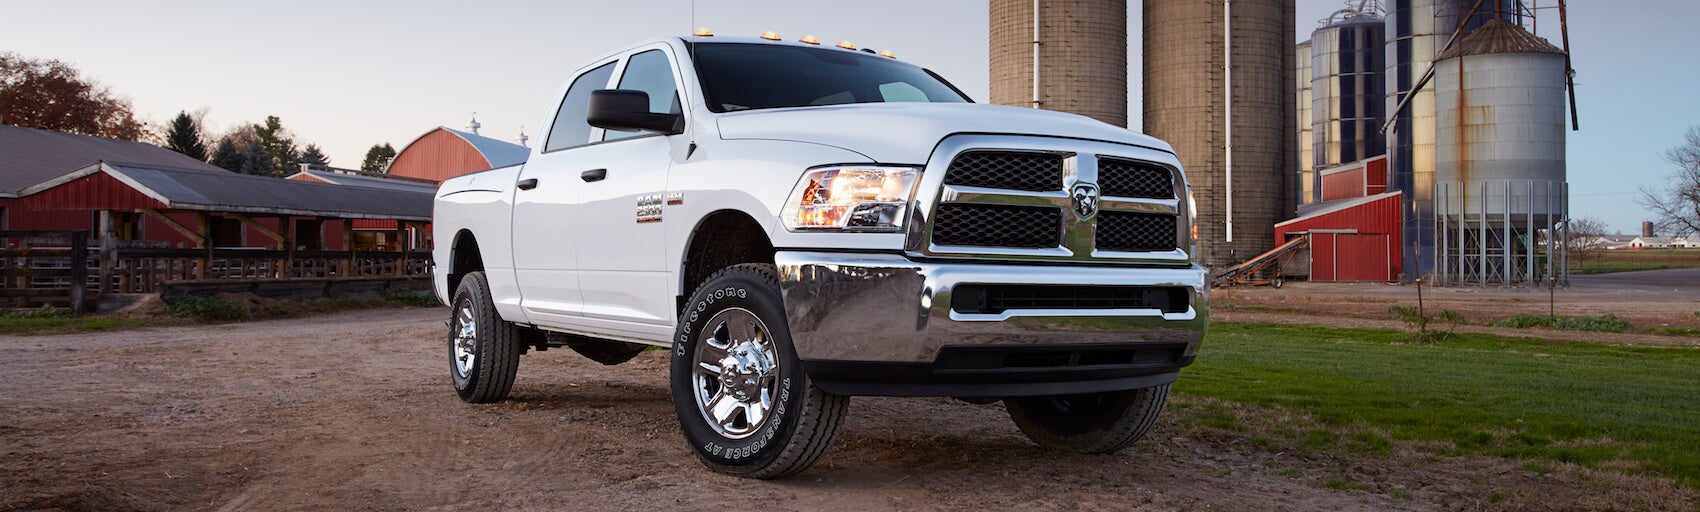 Used Ram 2500 for sale near Greenfield, IN